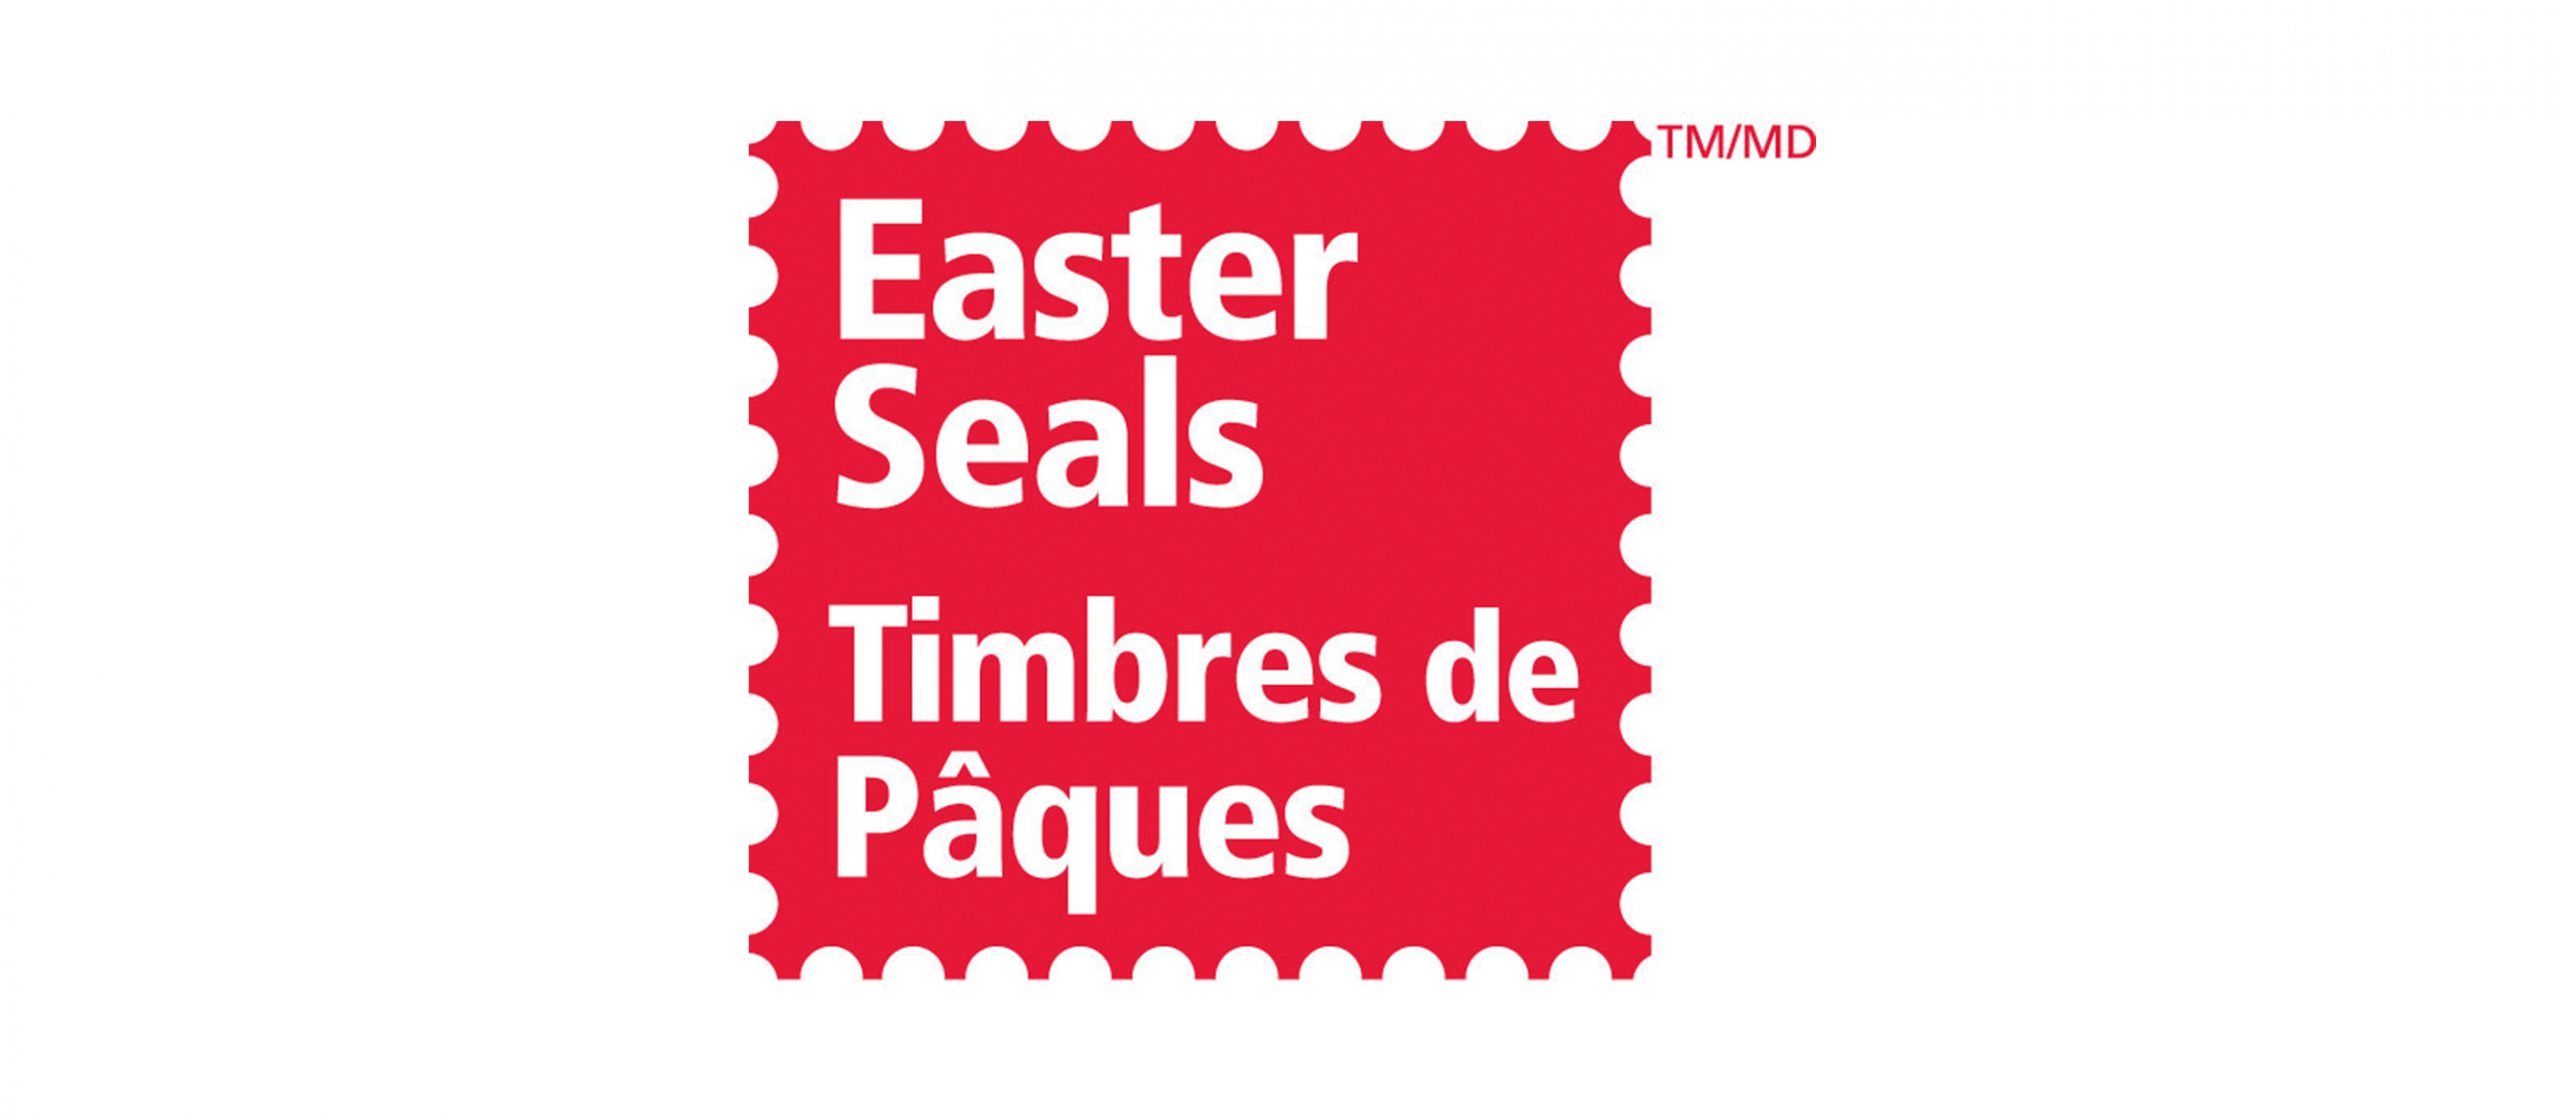 Inspirational Easter Seals fundraisers